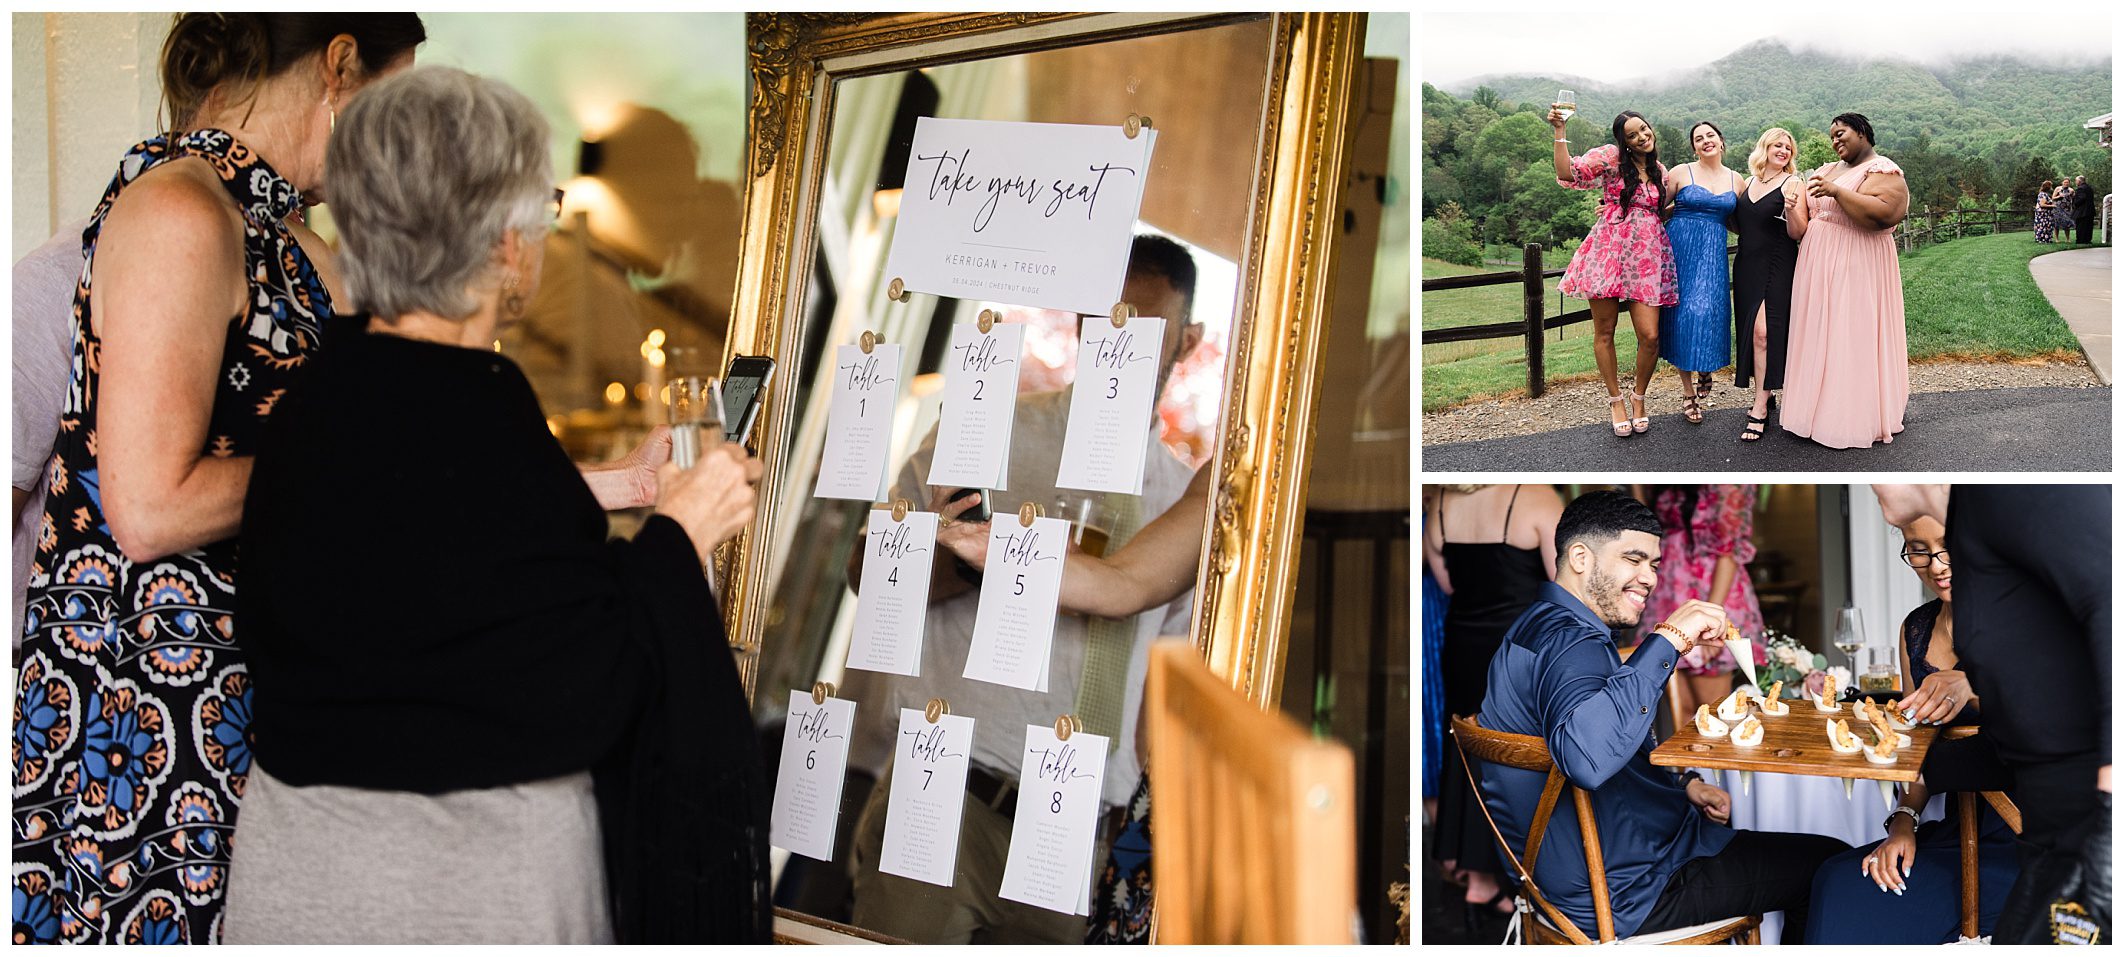 Three panels featuring mountain wedding scenes at Chestnut Ridge: guests checking seating chart, three women posing outdoors in the rain, couple dining and laughing at a table.